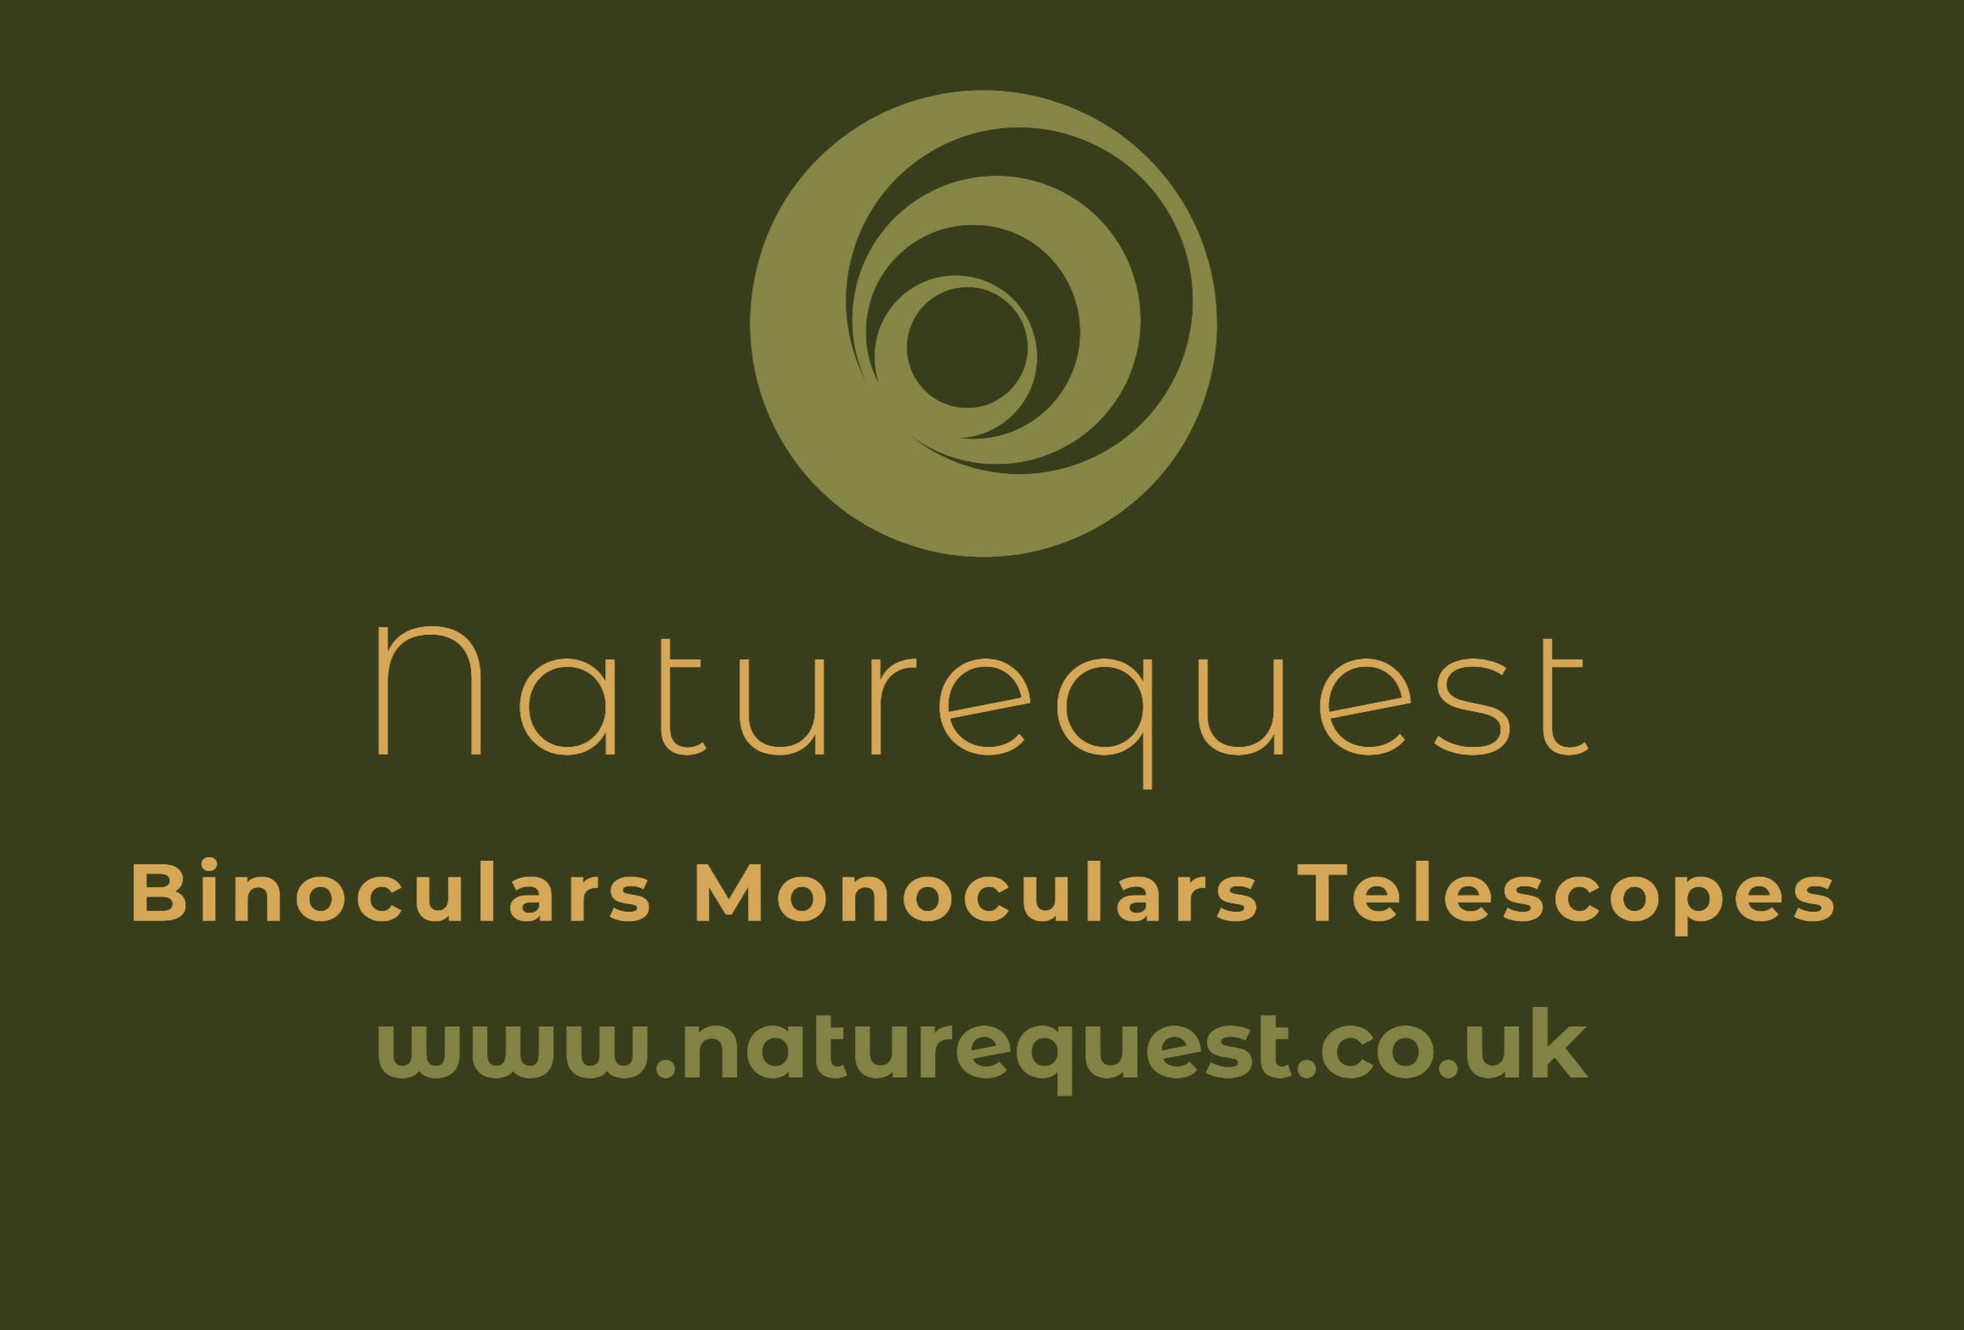 www.naturequest.co.uk